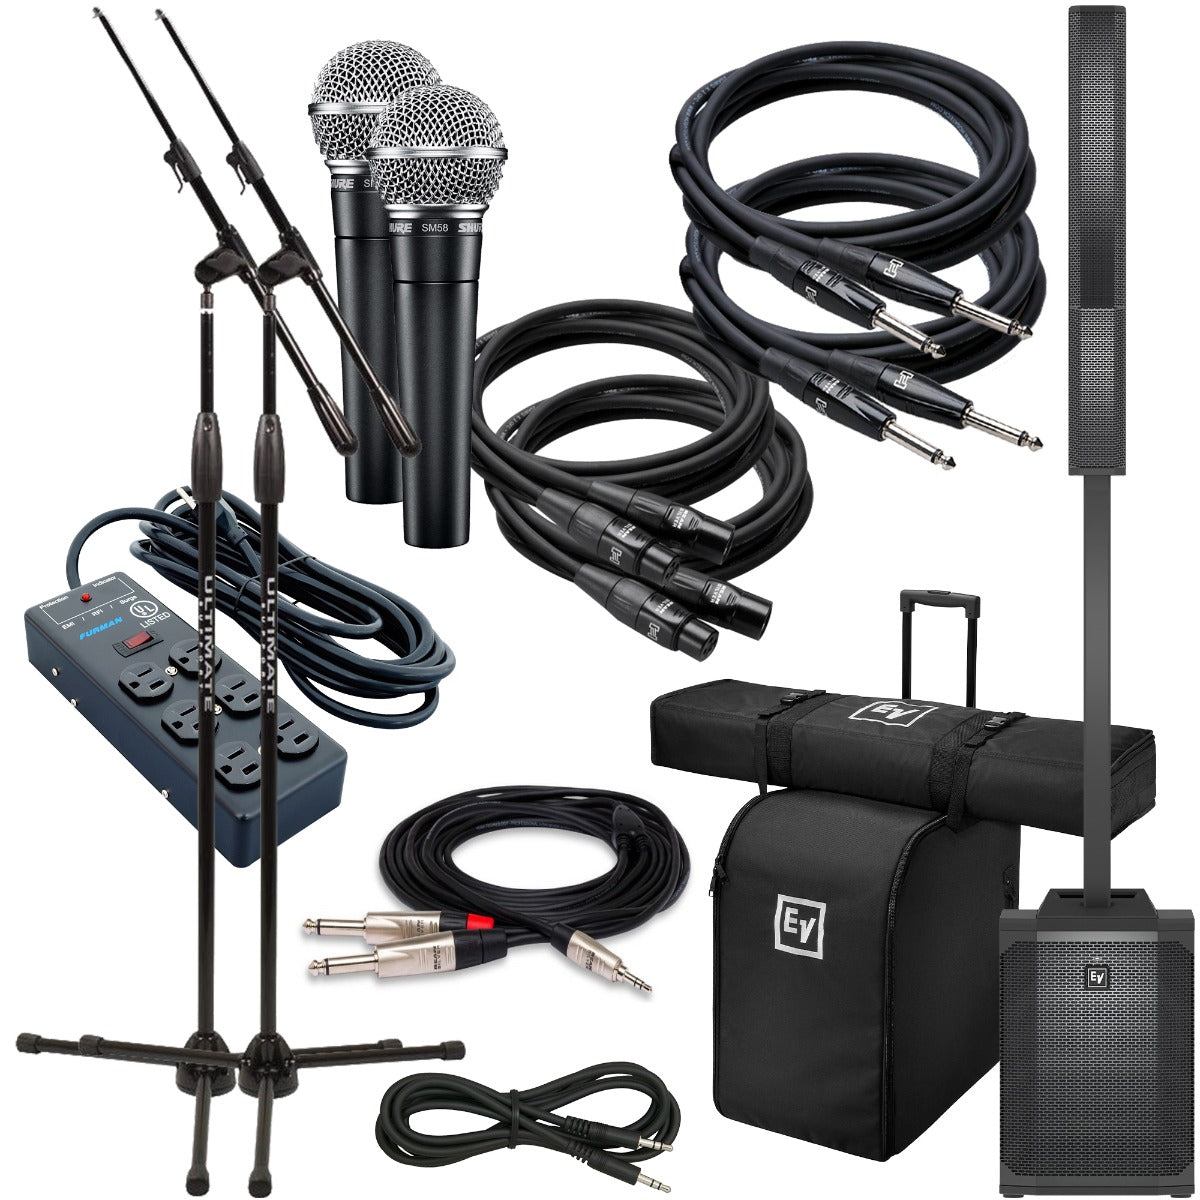 Collage of the components in the Electro-Voice Evolve 50M Portable Column System - Black STAGE RIG bundle